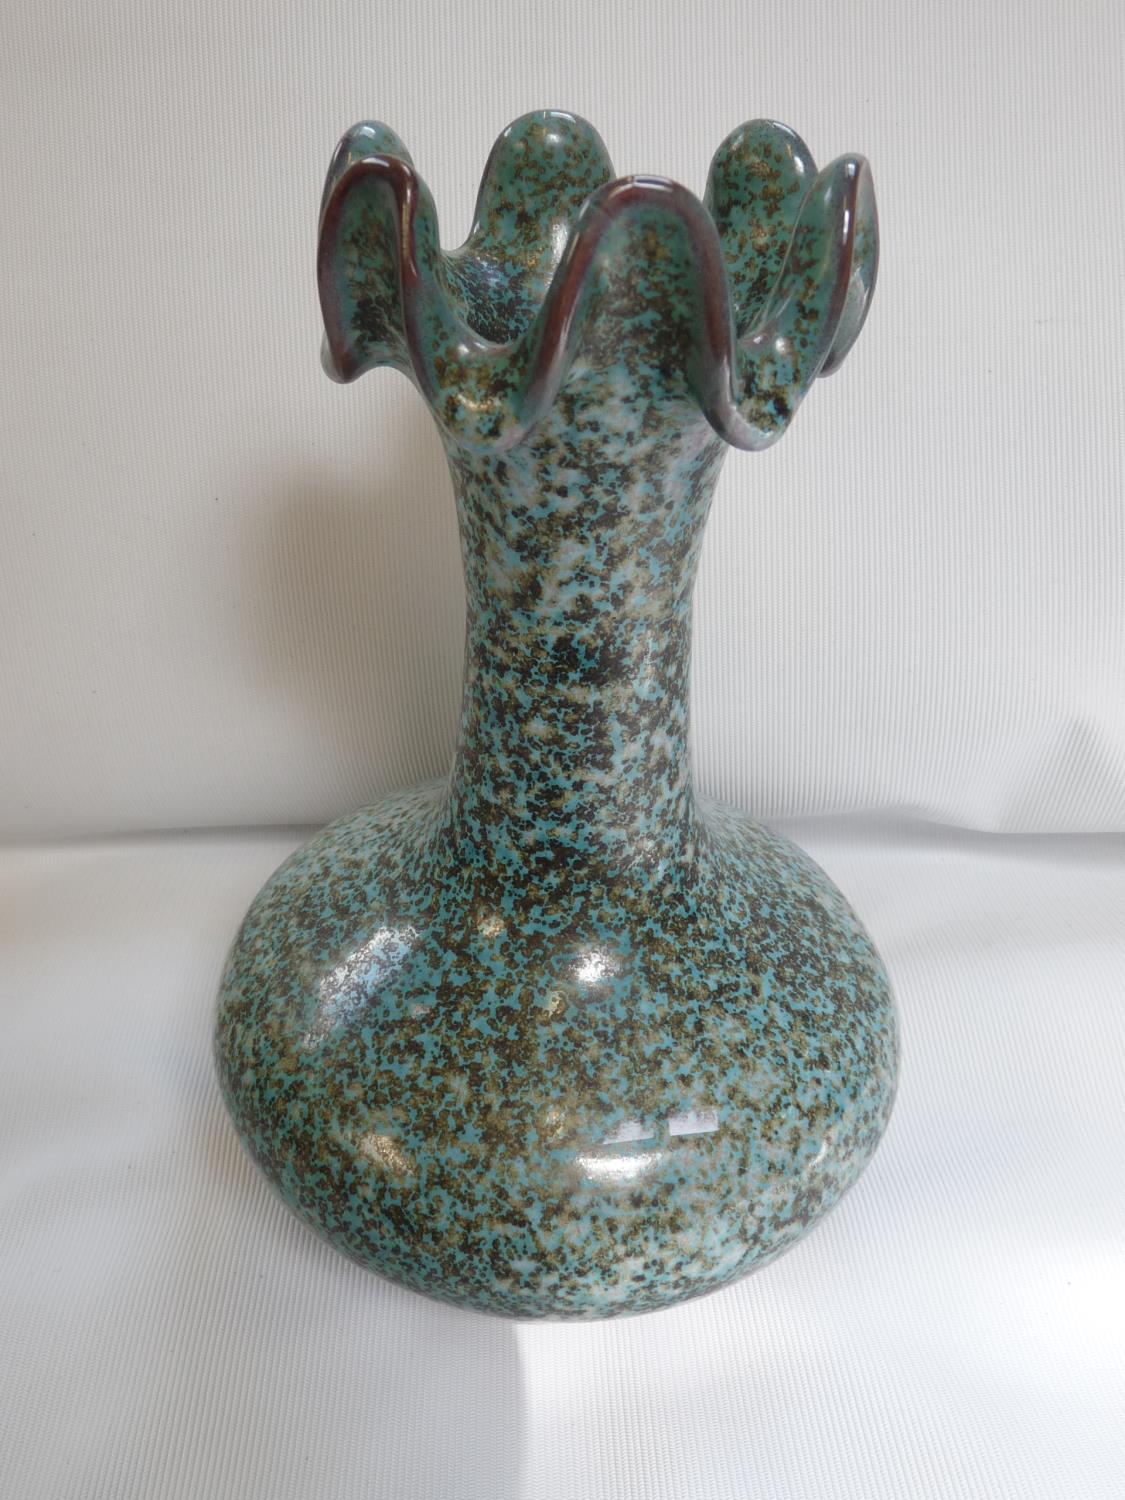 Asian flared vase with mottled green and colbalt glaze, impressed character mark to base, 22cm in